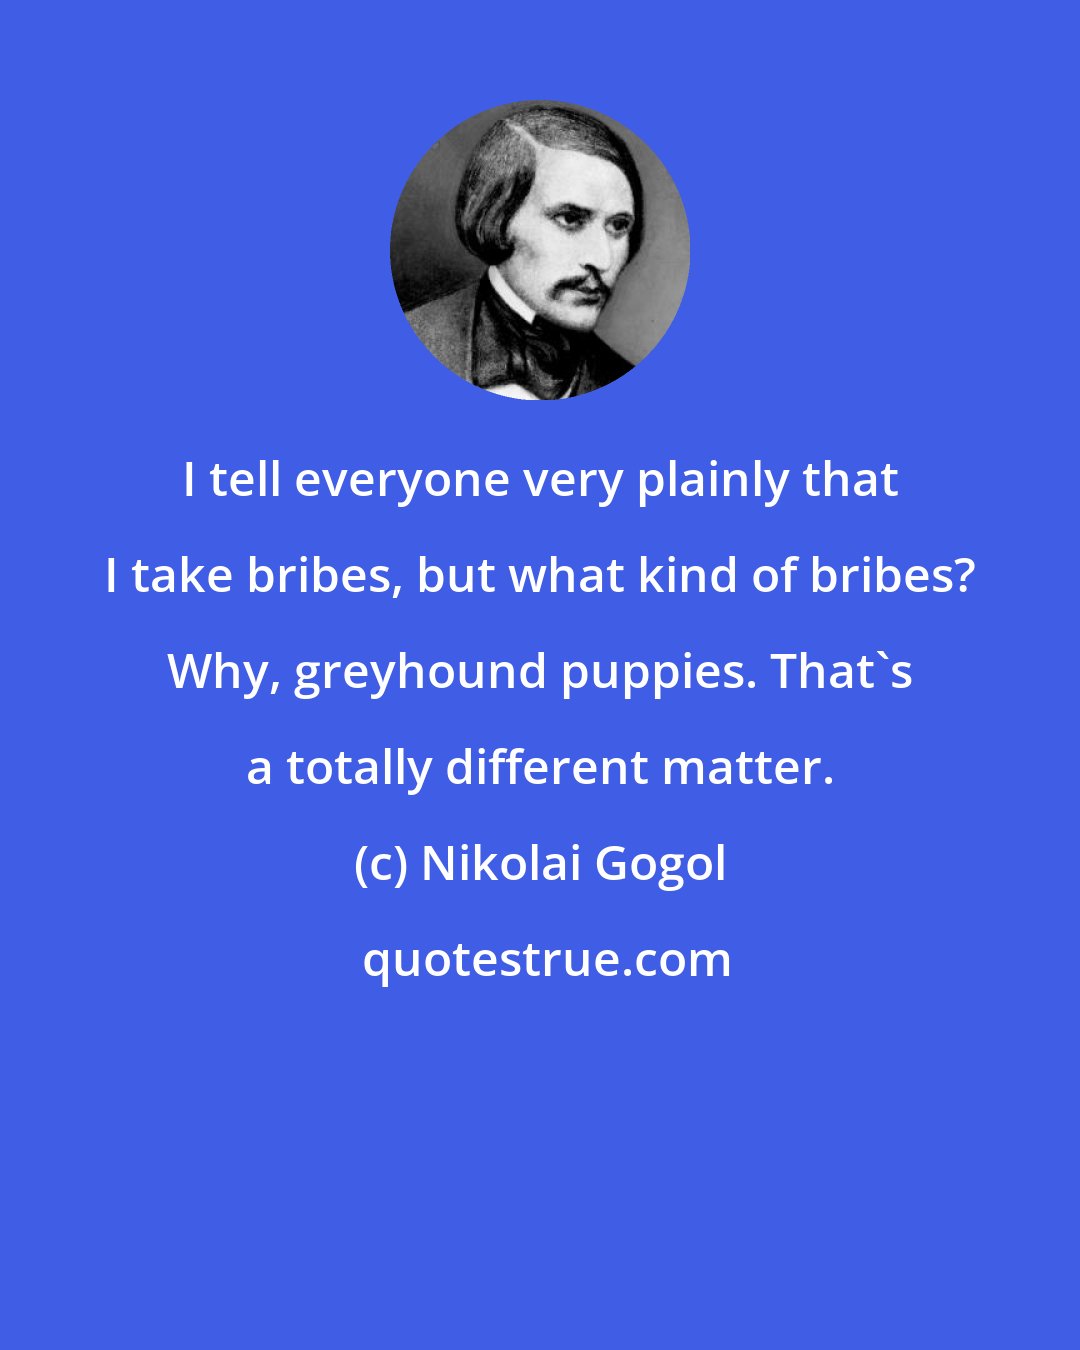 Nikolai Gogol: I tell everyone very plainly that I take bribes, but what kind of bribes? Why, greyhound puppies. That's a totally different matter.